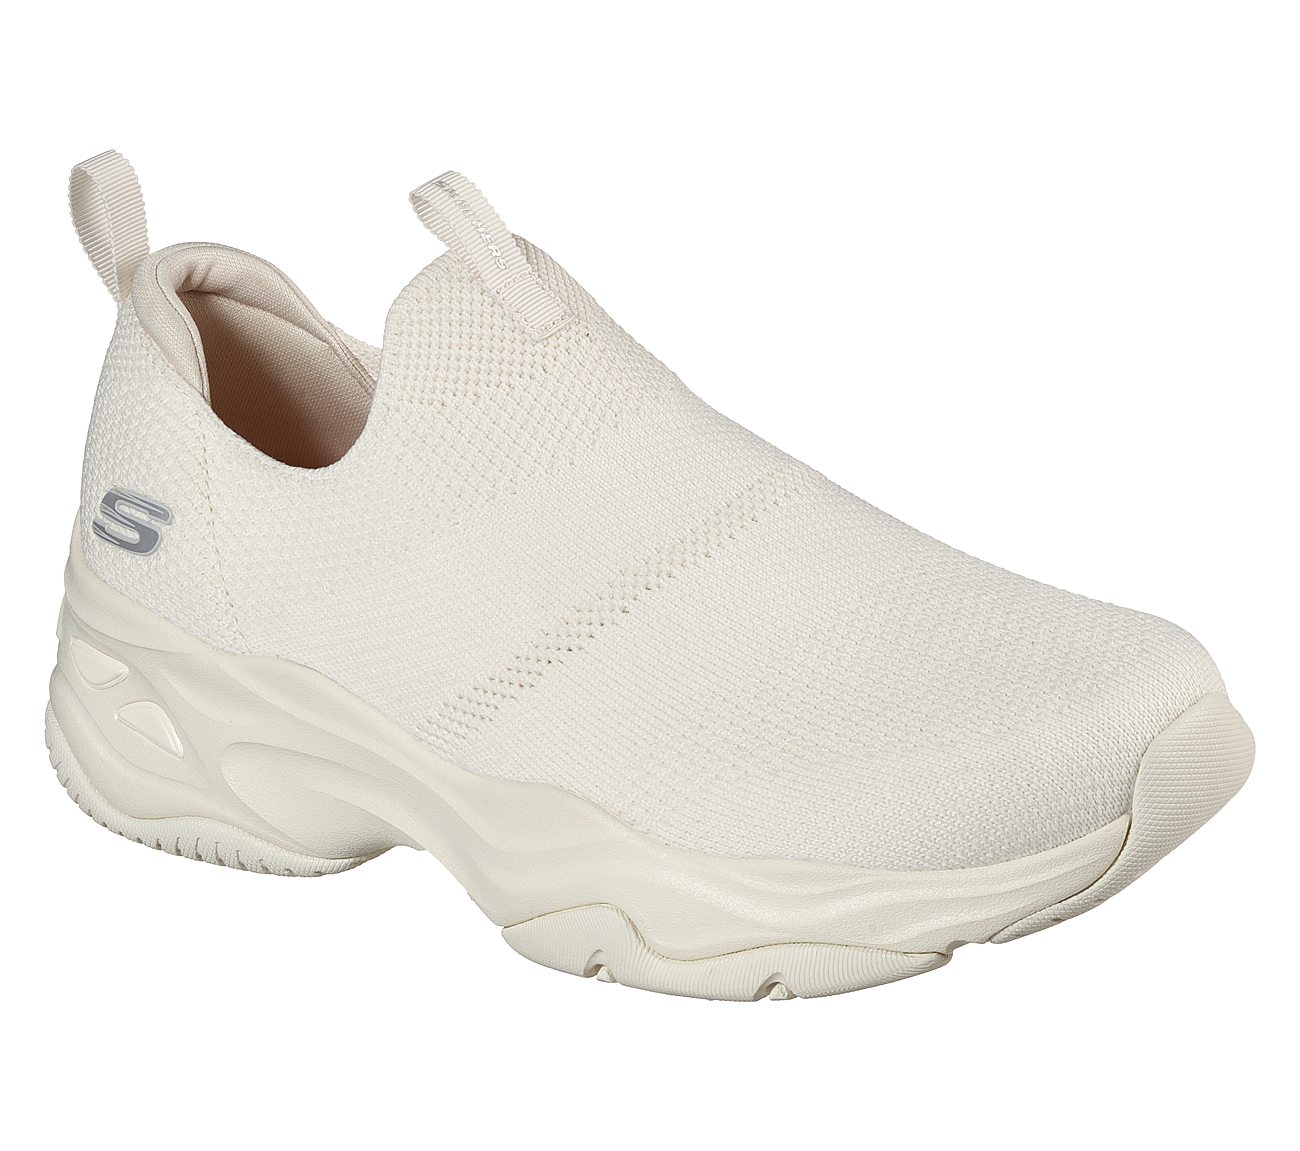 D'LITES 4.0-PERFECT FLOW, OFF WHITE Footwear Lateral View